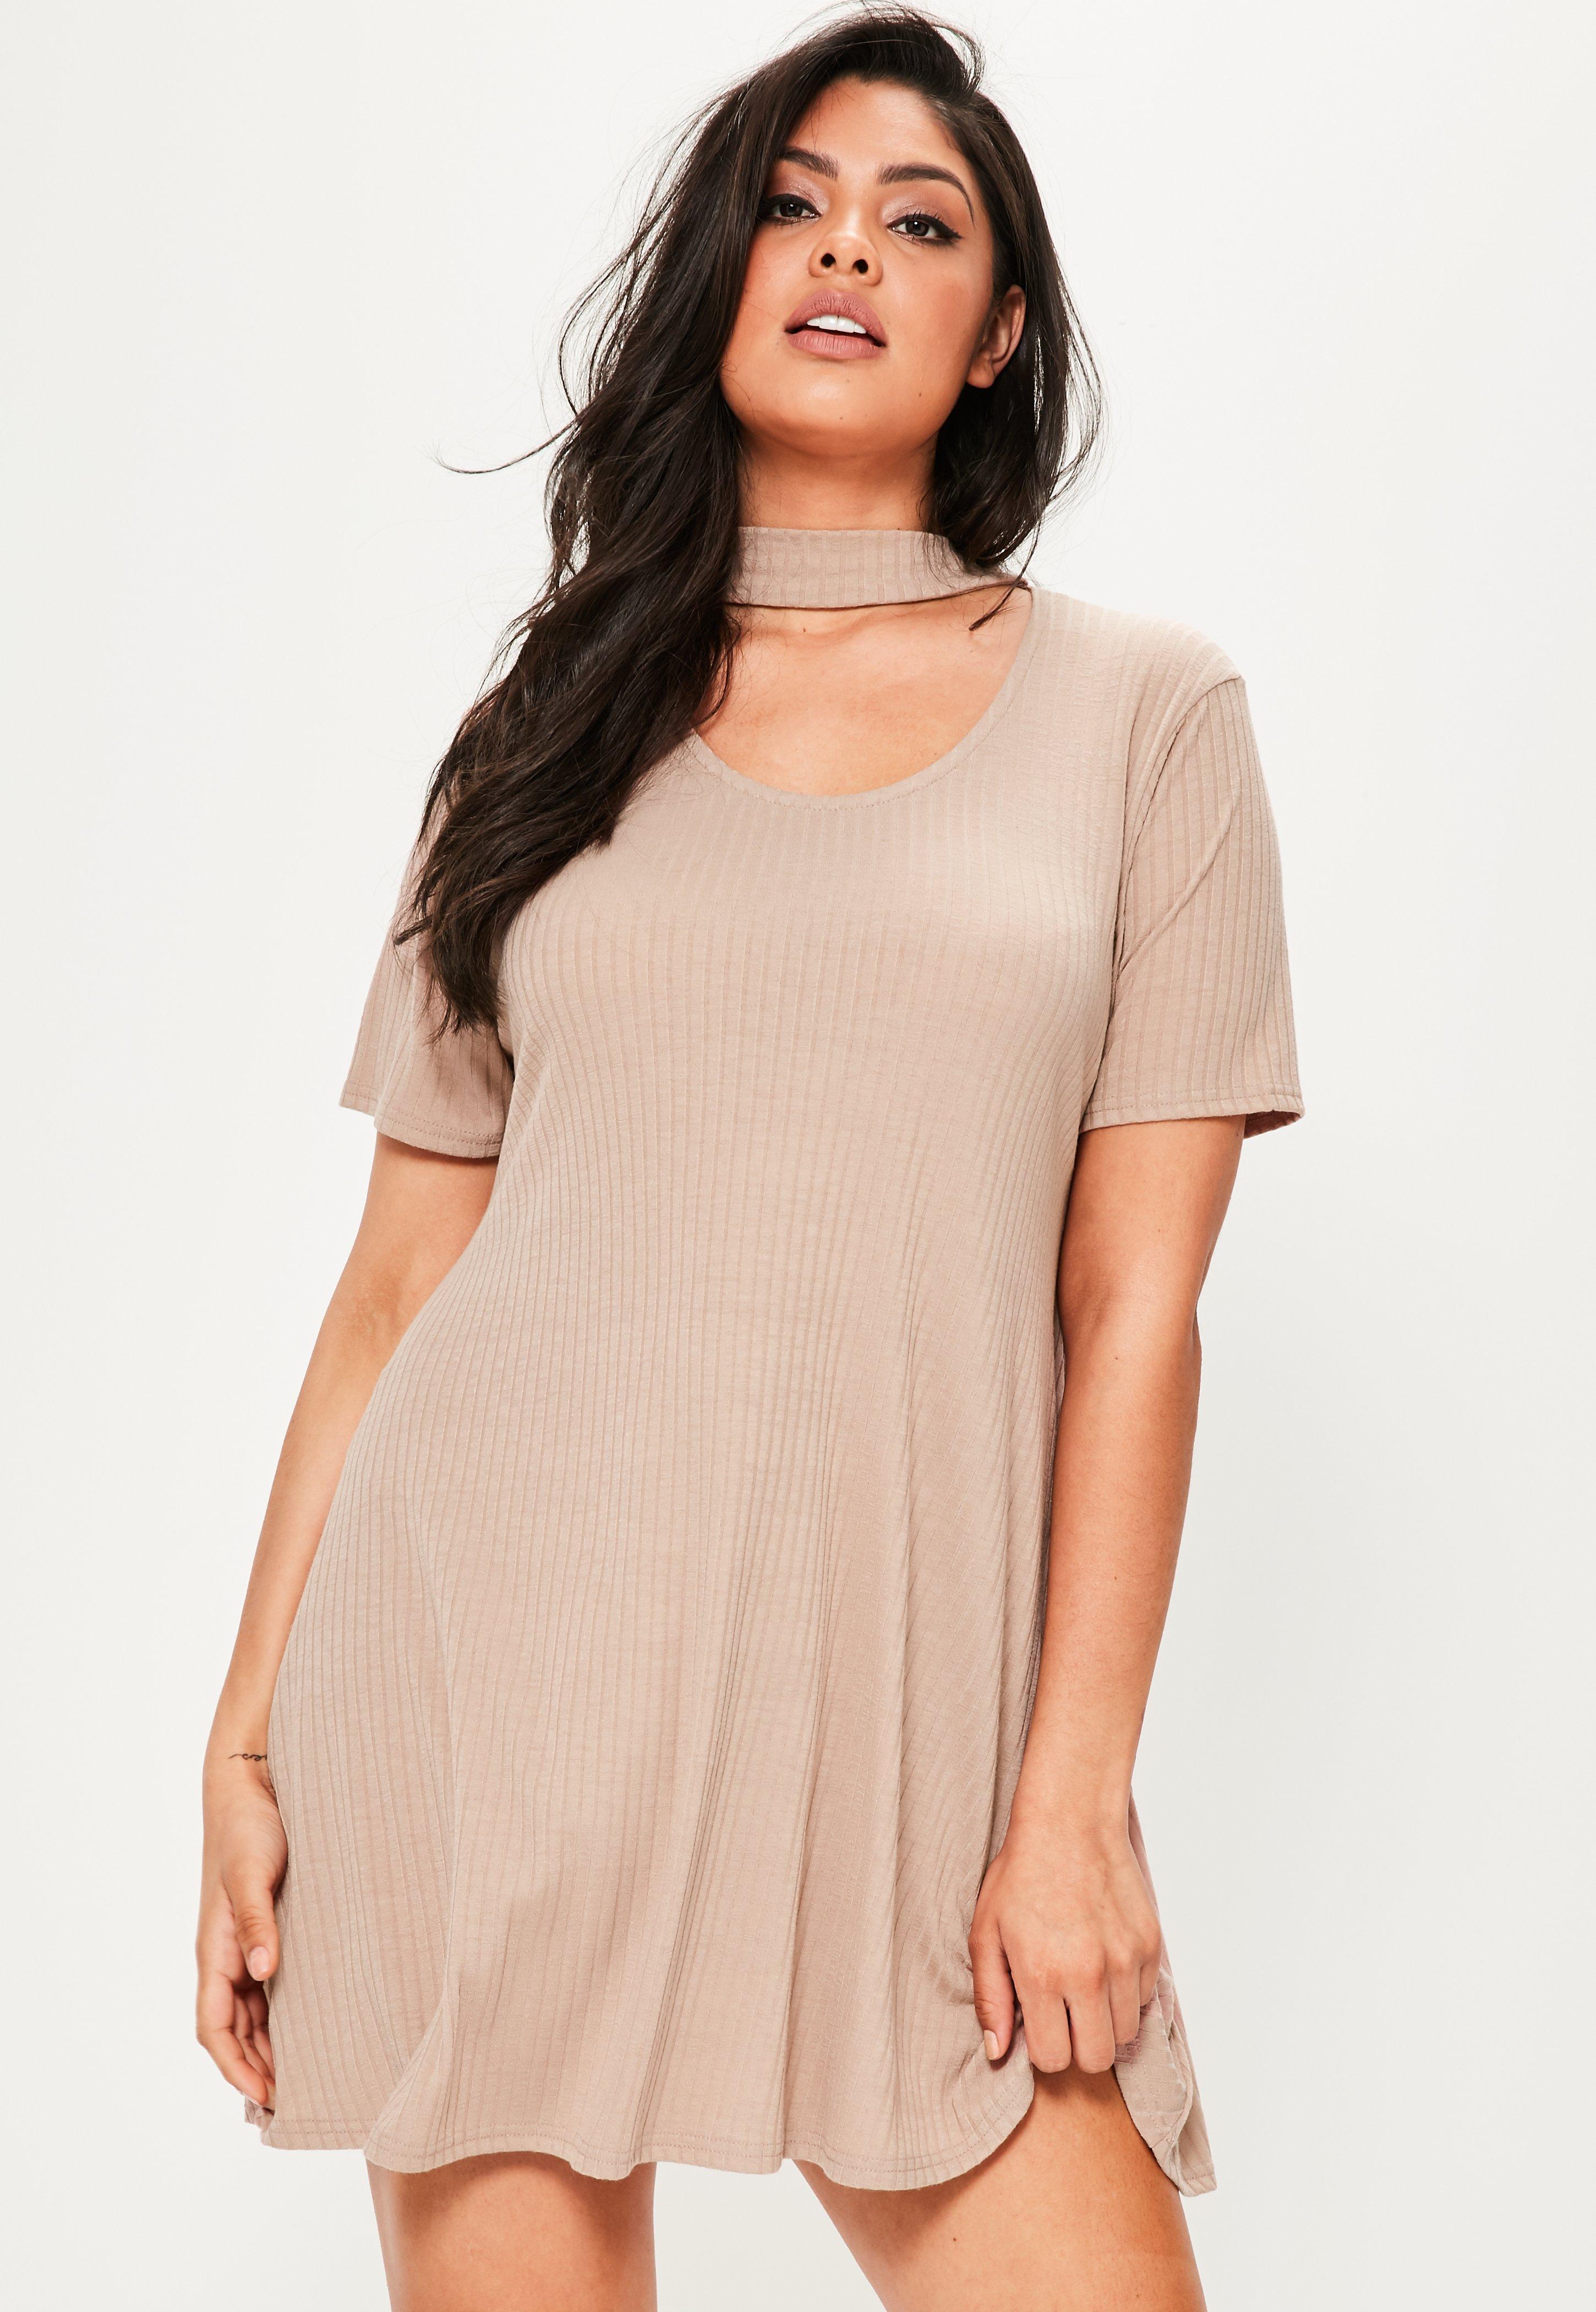 Lyst - Missguided Plus Size Nude Choker Ribbed Swing Dress 